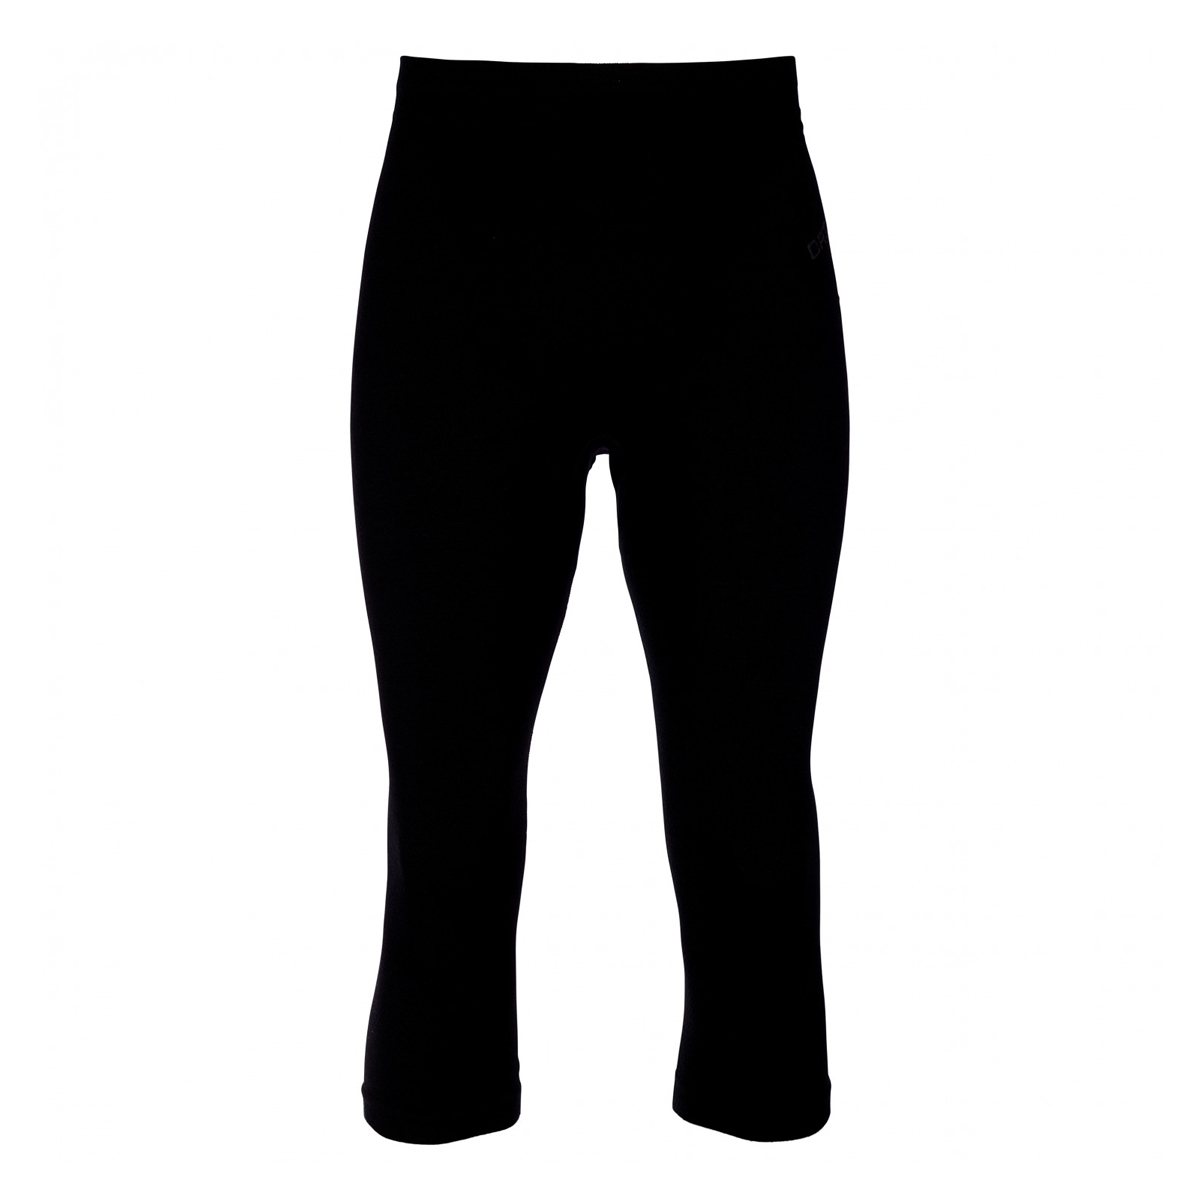 ORTOVOX 230 COMPETITION LONG PANTS M